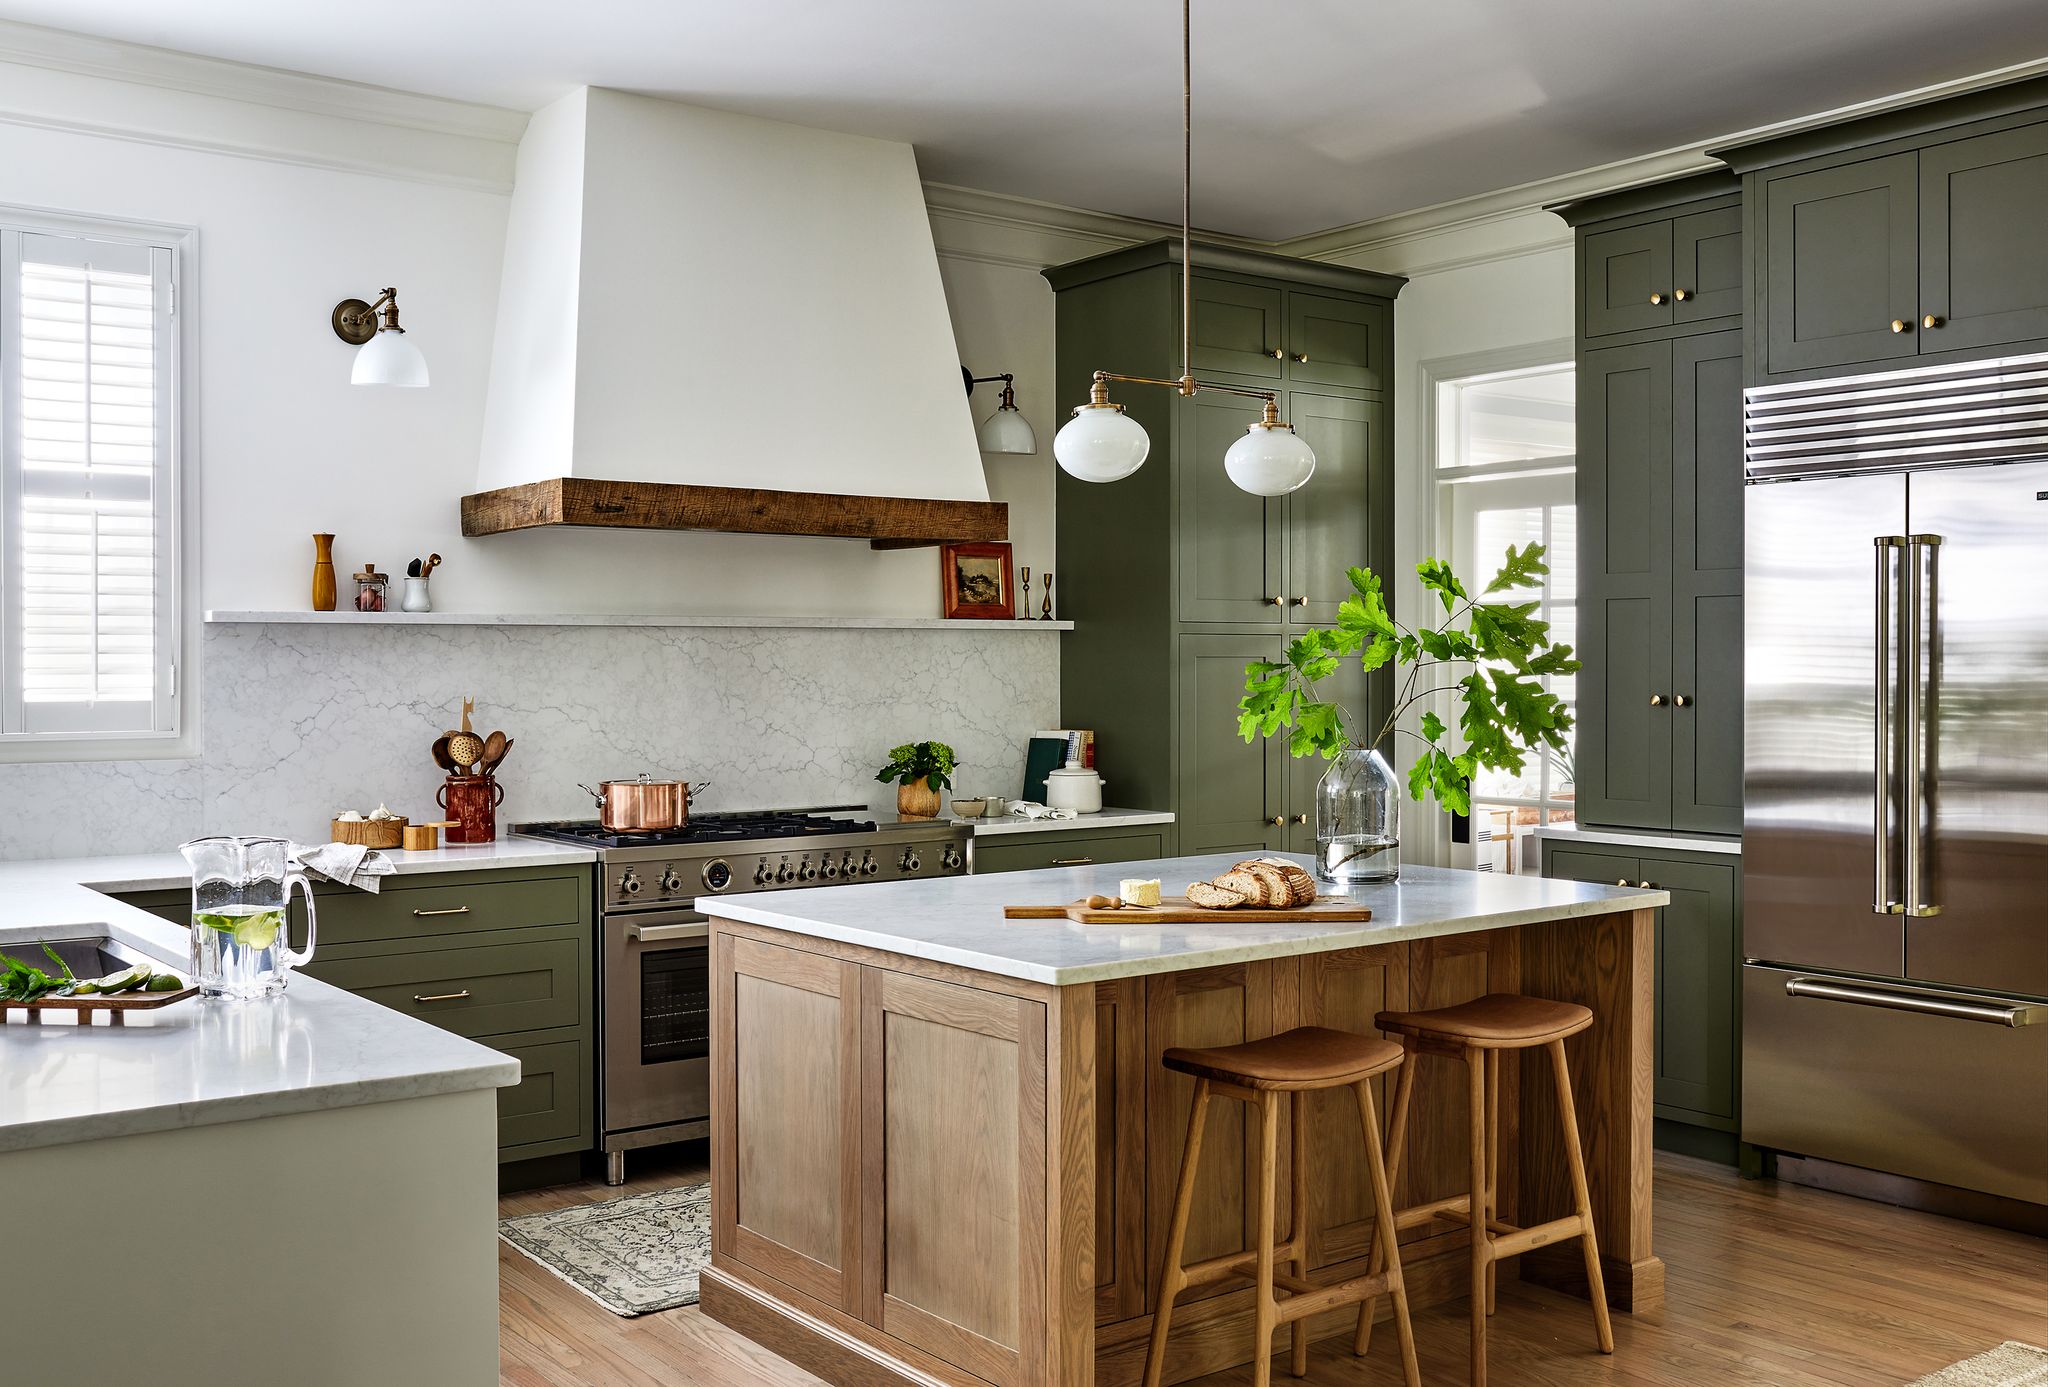 kitchen with an green cabinetry and a kitchen island in the center